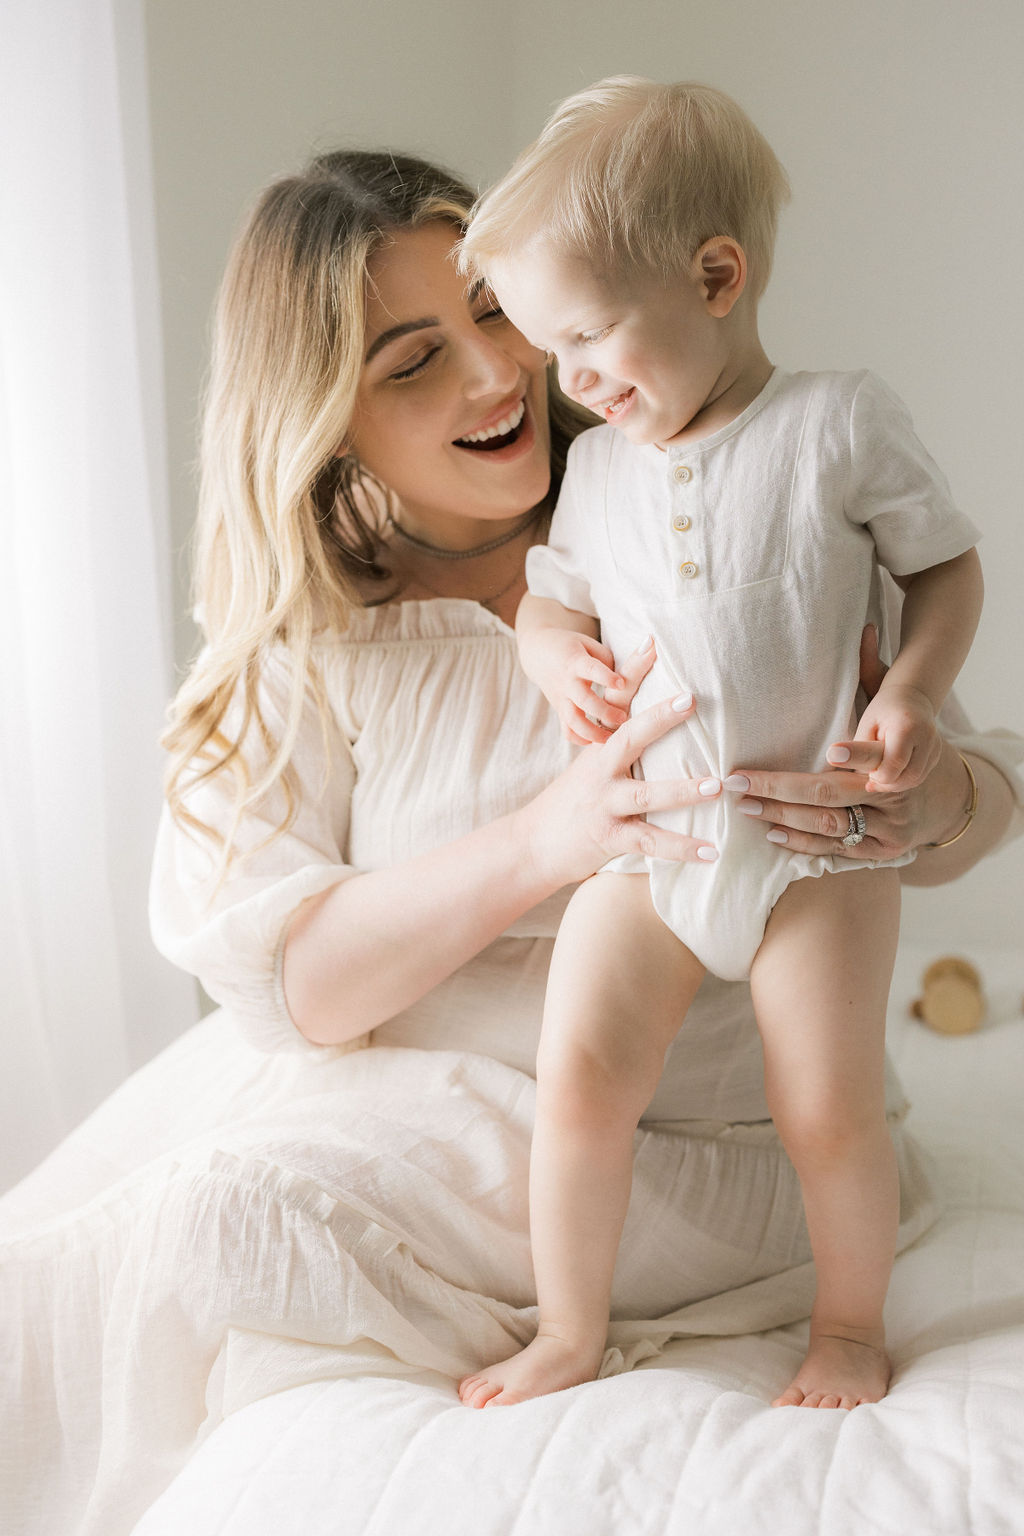 A mother plays with her toddler son in a white onesie and white dress